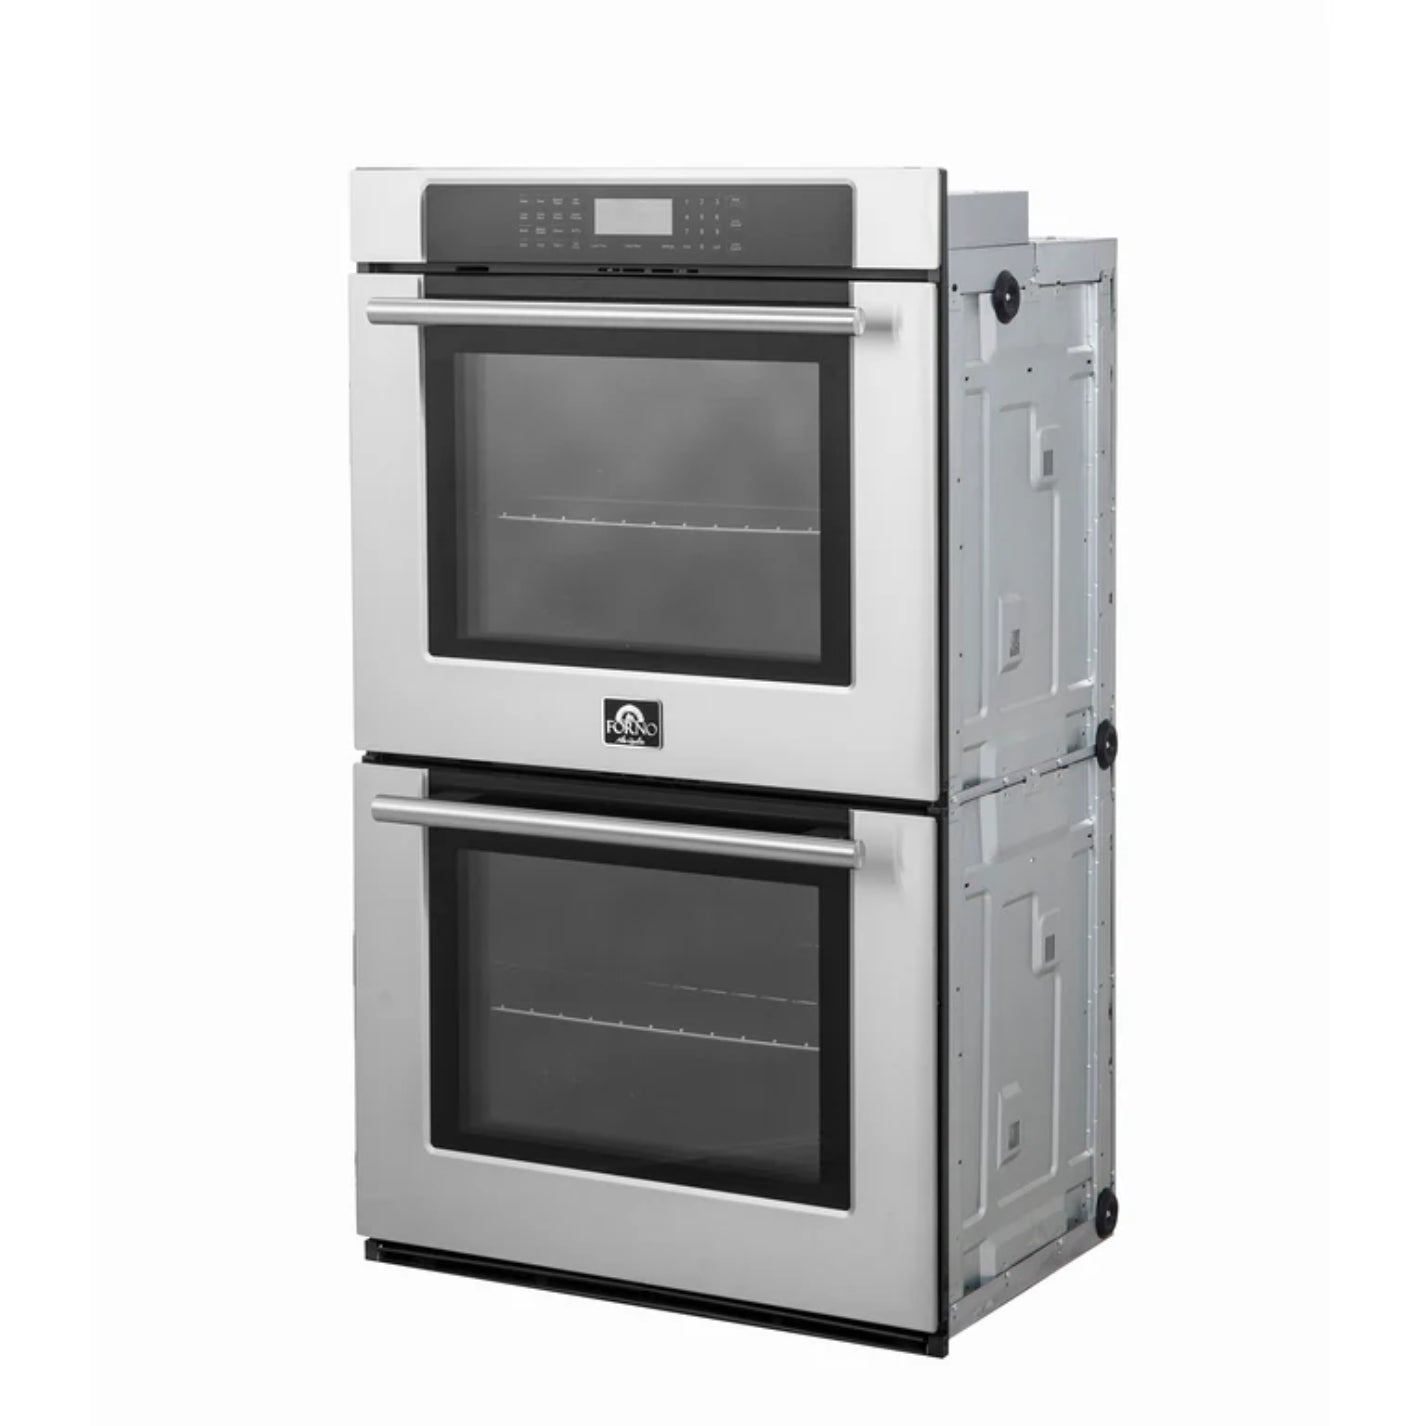 Forno 30" Built-In Double Wall Oven In Stainless Steel, Auto Cooking And Steam Cleaning, FBOEL1365-30